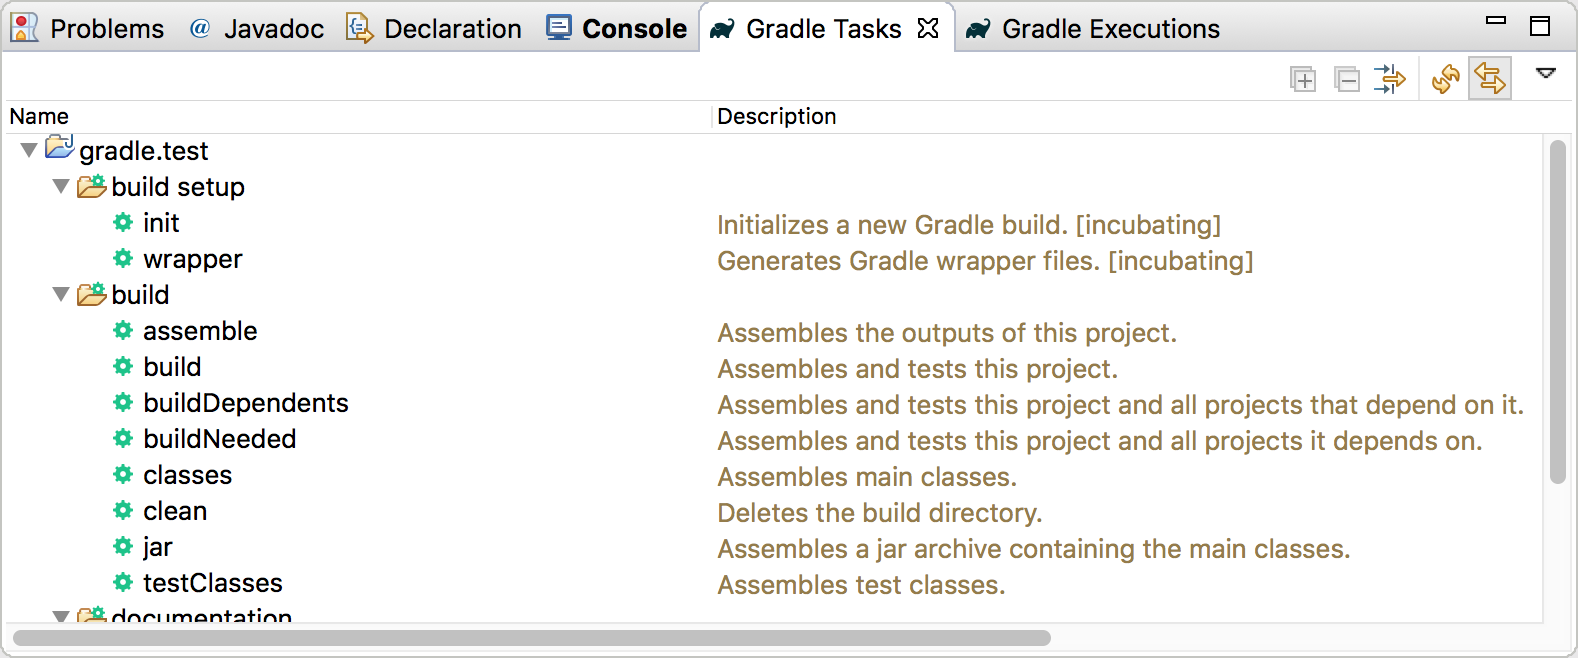 The Gradle task view